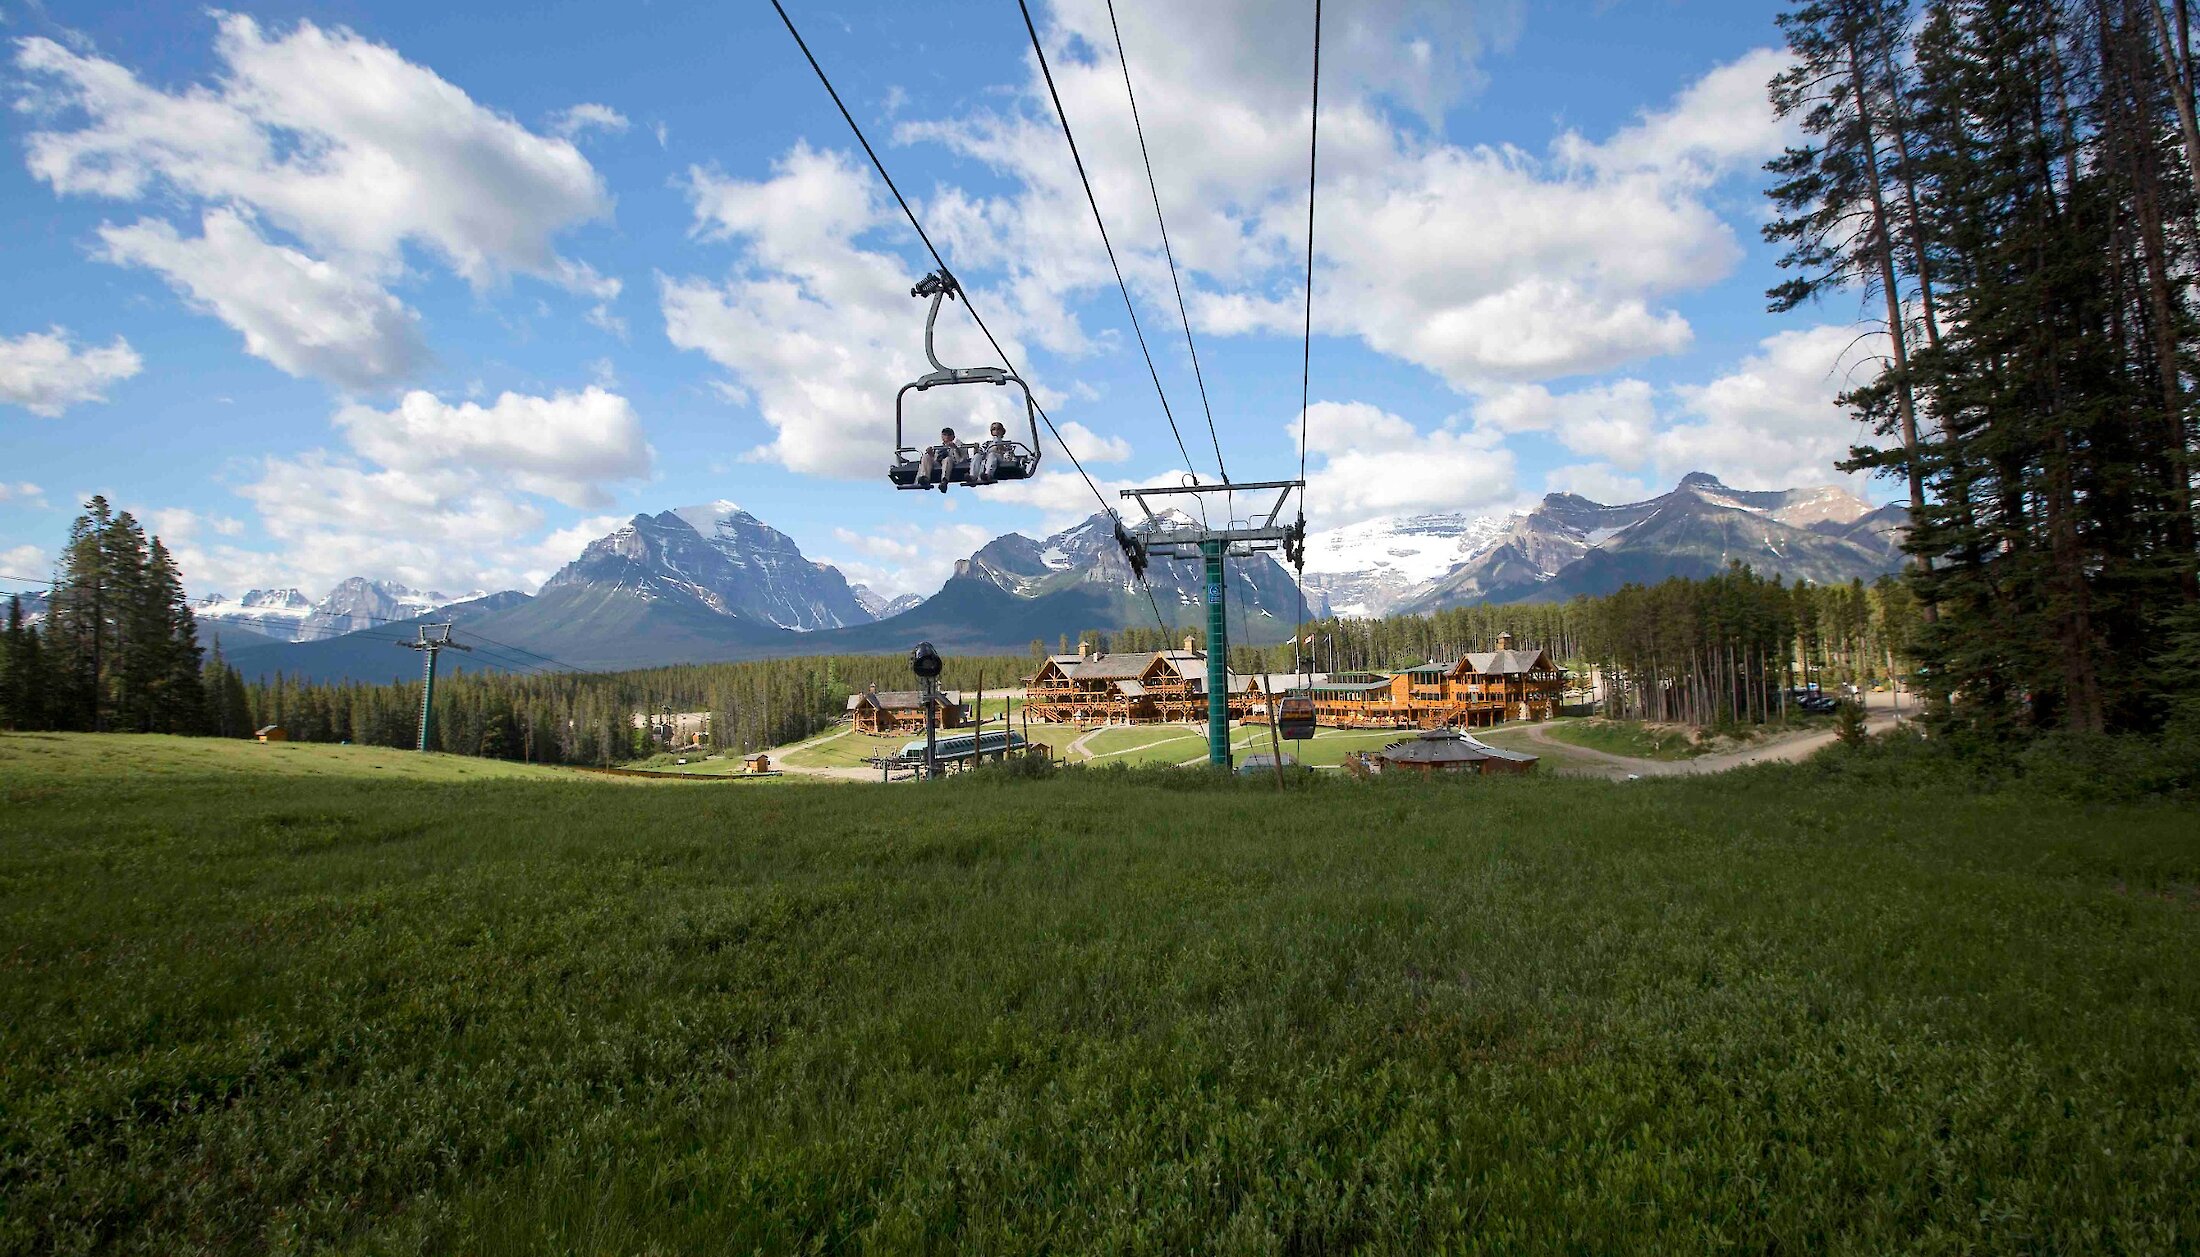 The Lake Louise sightseeing chairlift going over the green grass